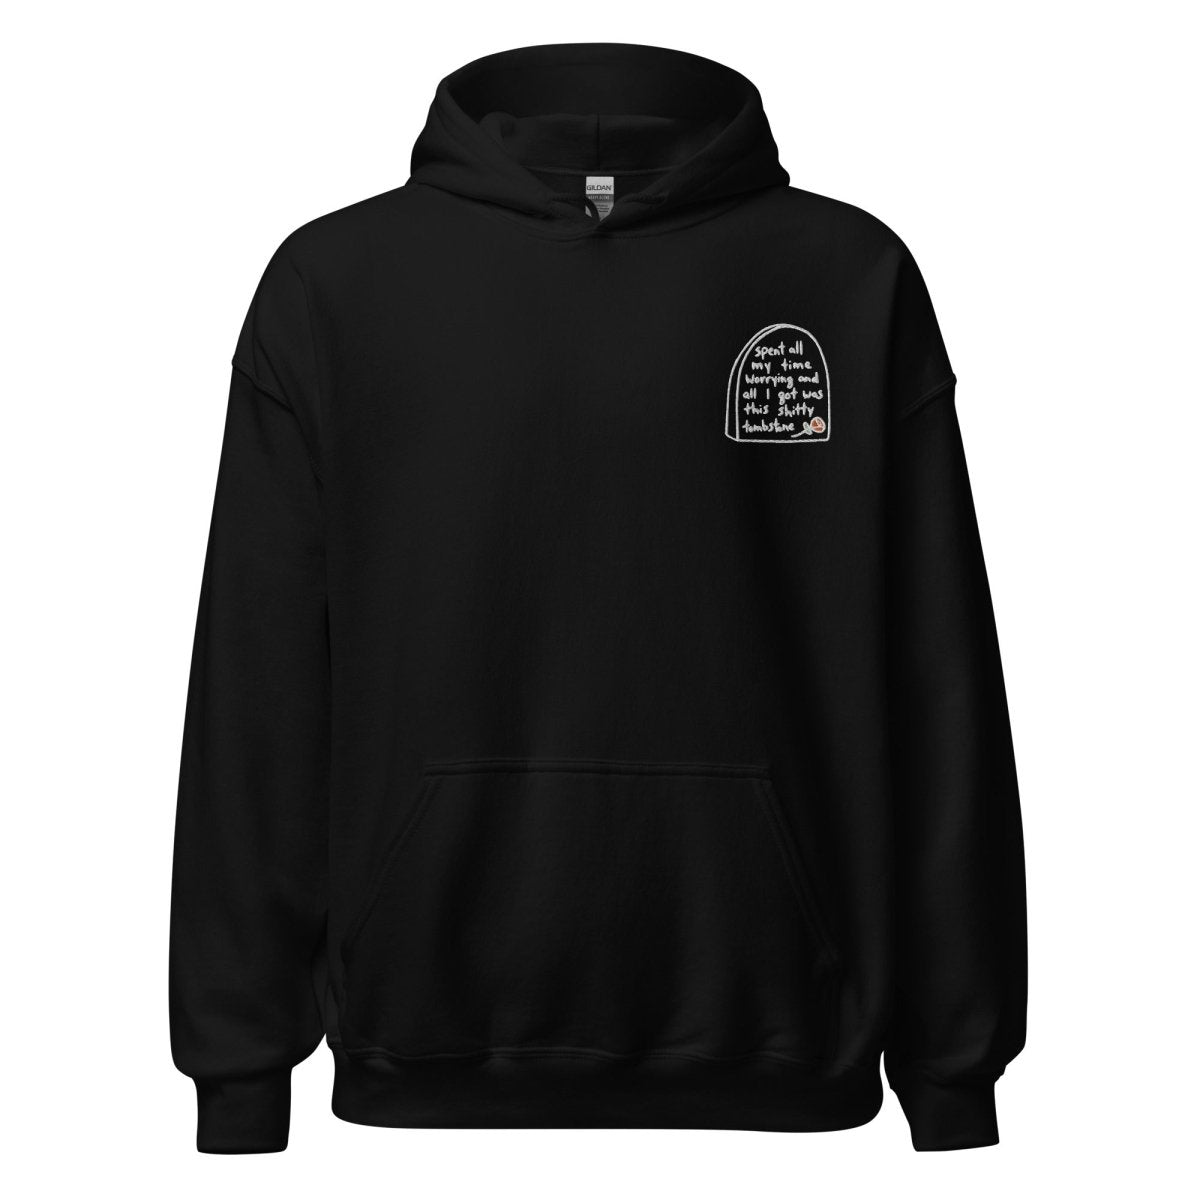 Worry Tombstone Embroidered Hoodie - Hooded Sweatshirt - Pretty Bad Co.